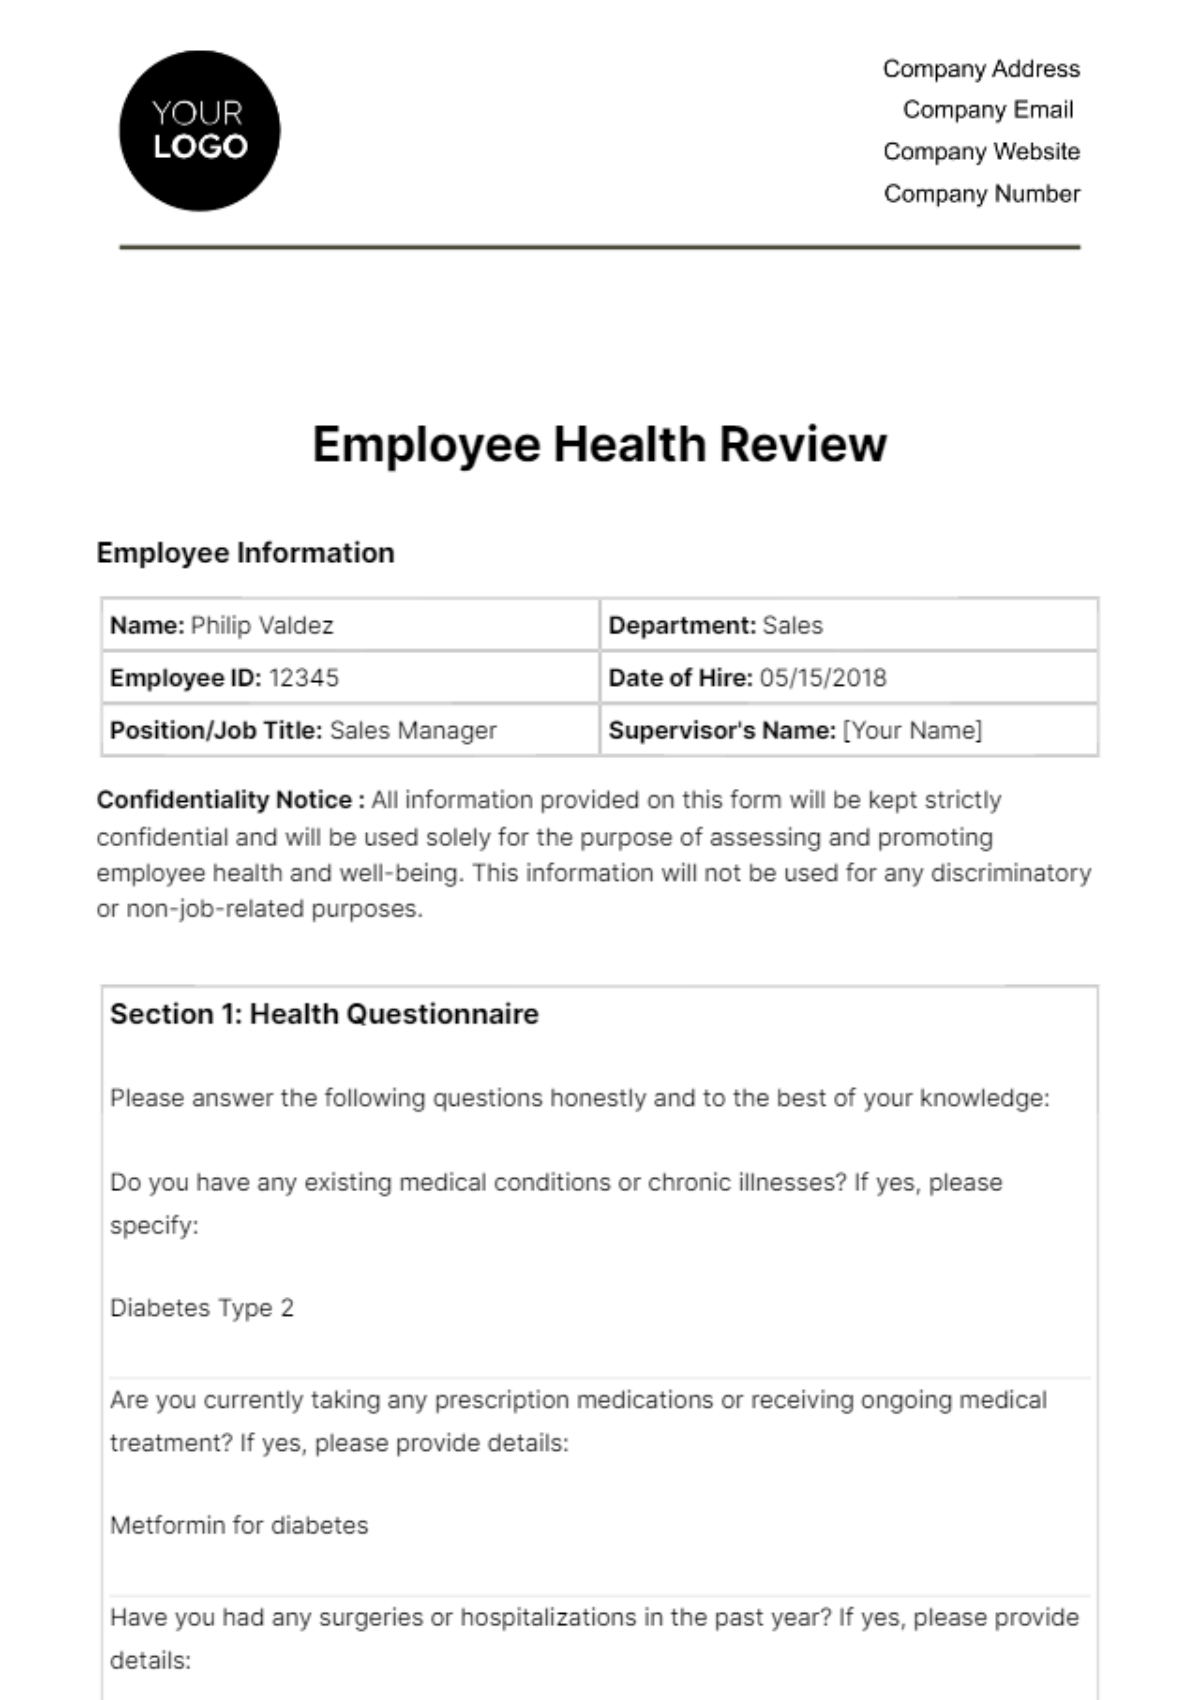 Free Employee Health Review HR Template